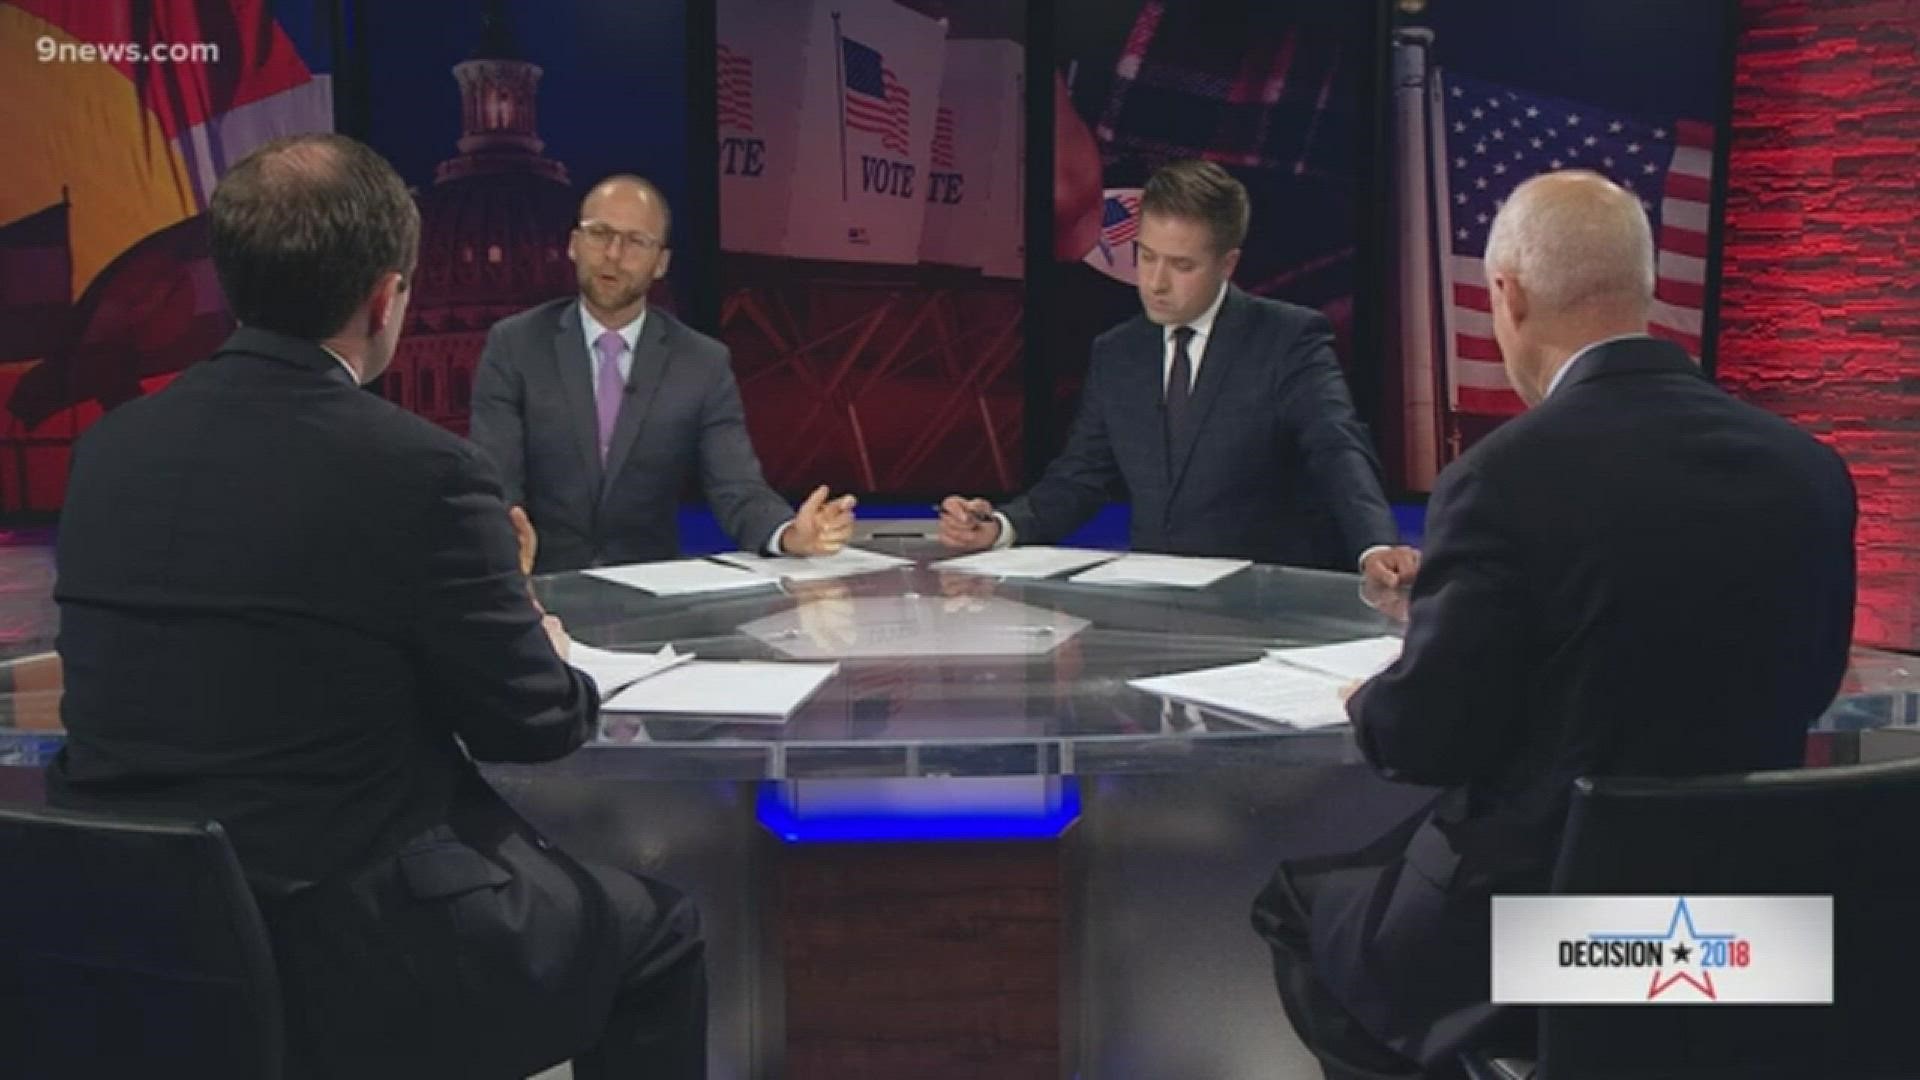 Mike Coffman and Jason Crow discuss taking PAC money during their debate on 9NEWS.